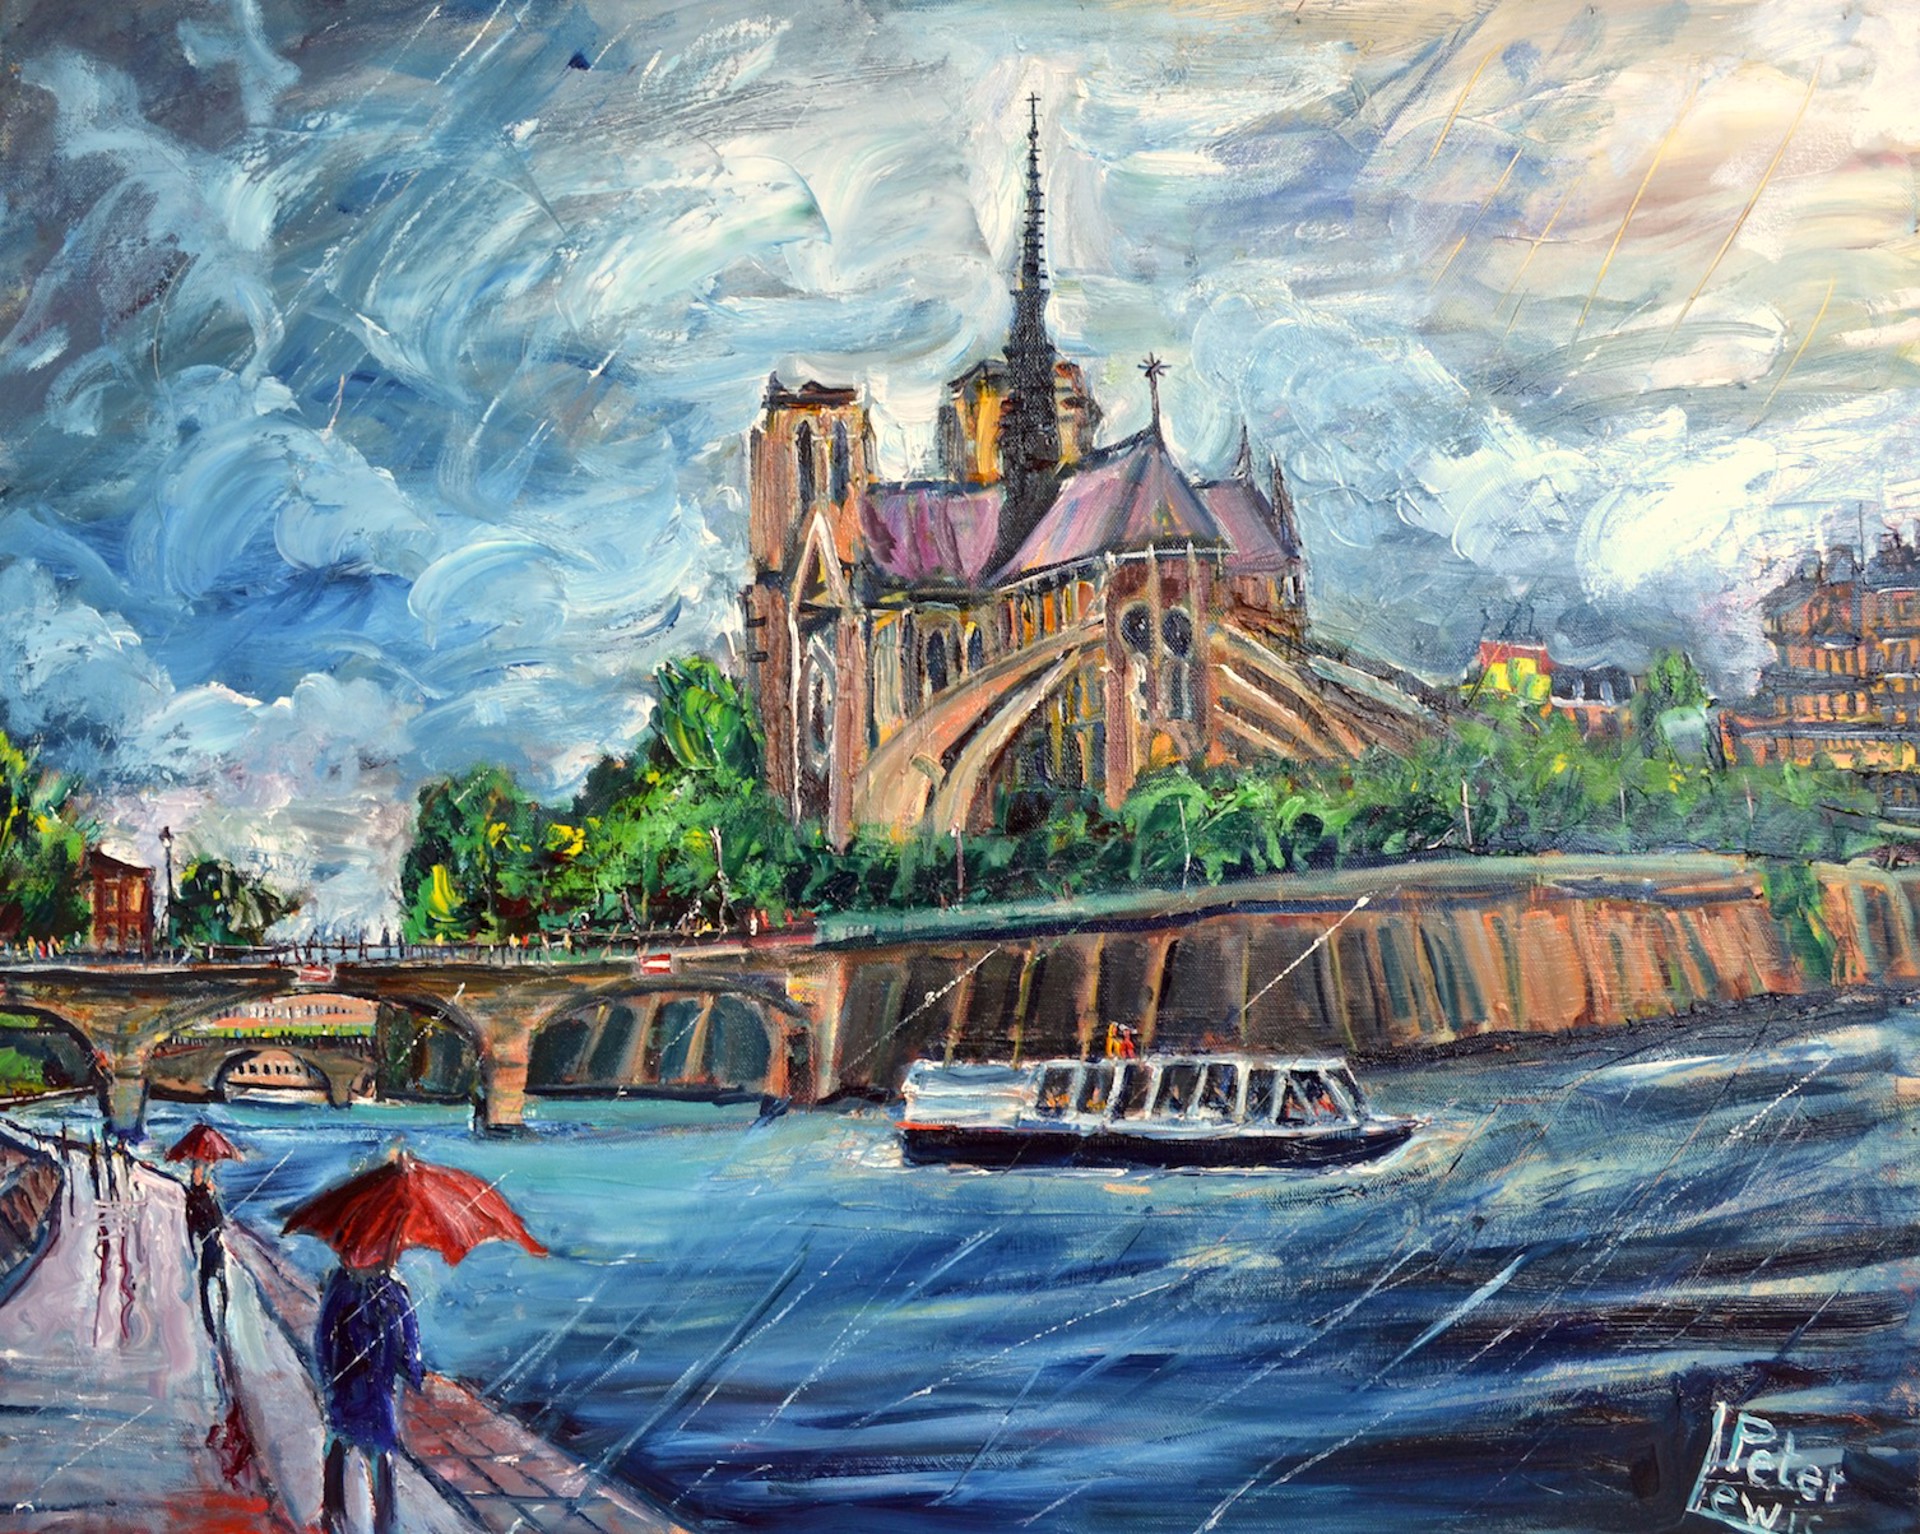 Notre Dame by Peter Lewis